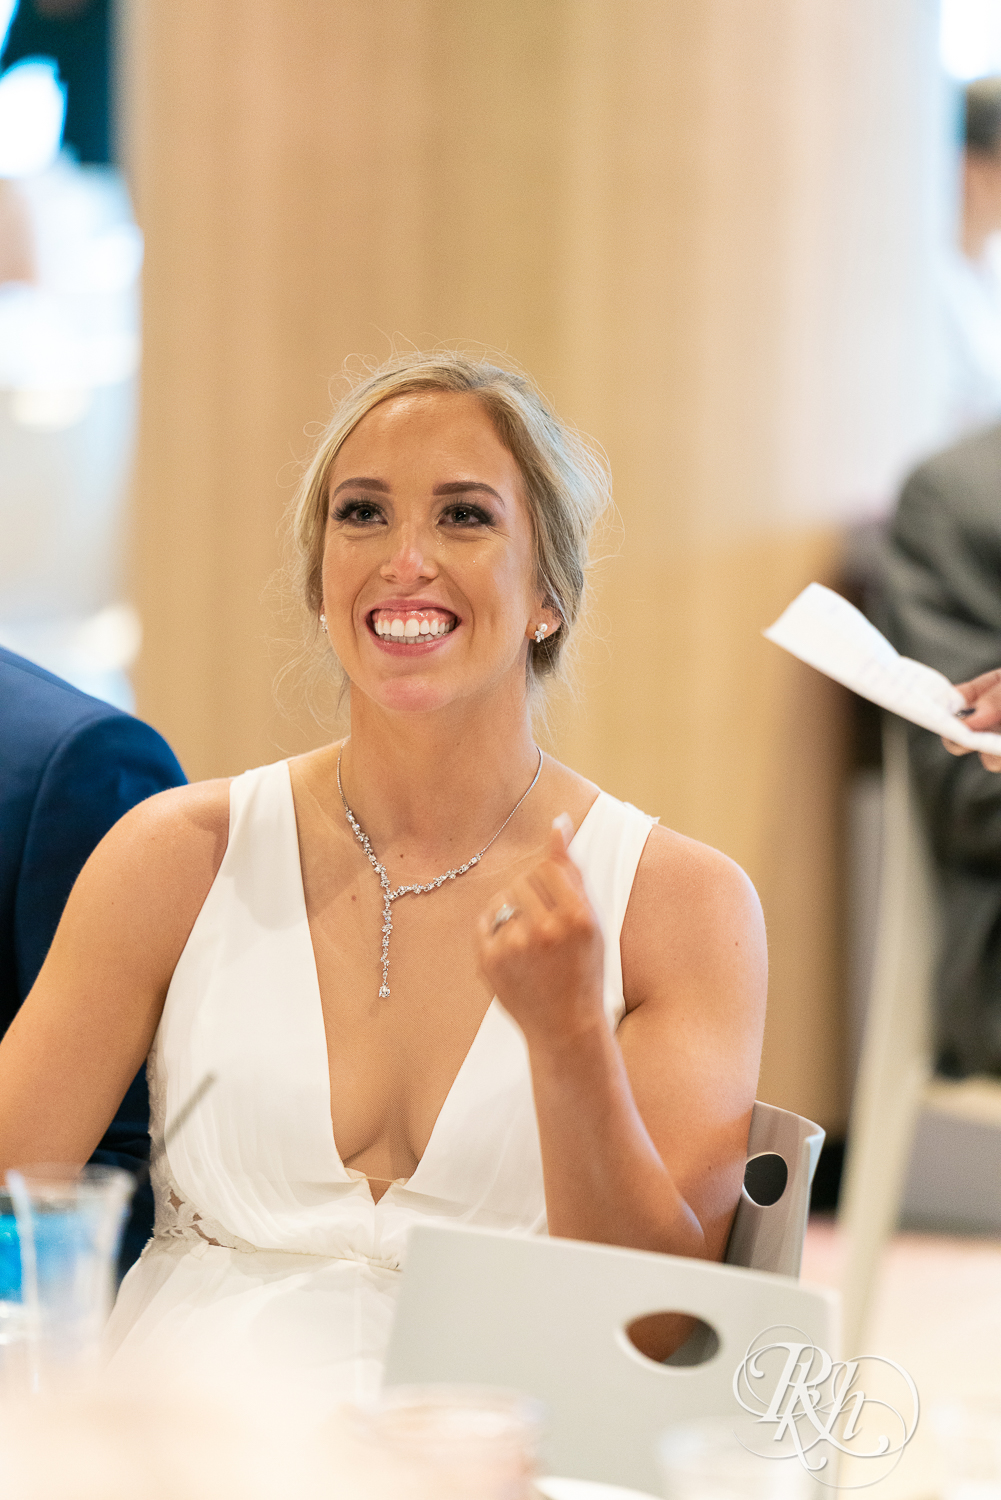 Bride smiling during wedding reception at head table at Saint Paul Event Center in Saint Paul, Minnesota.